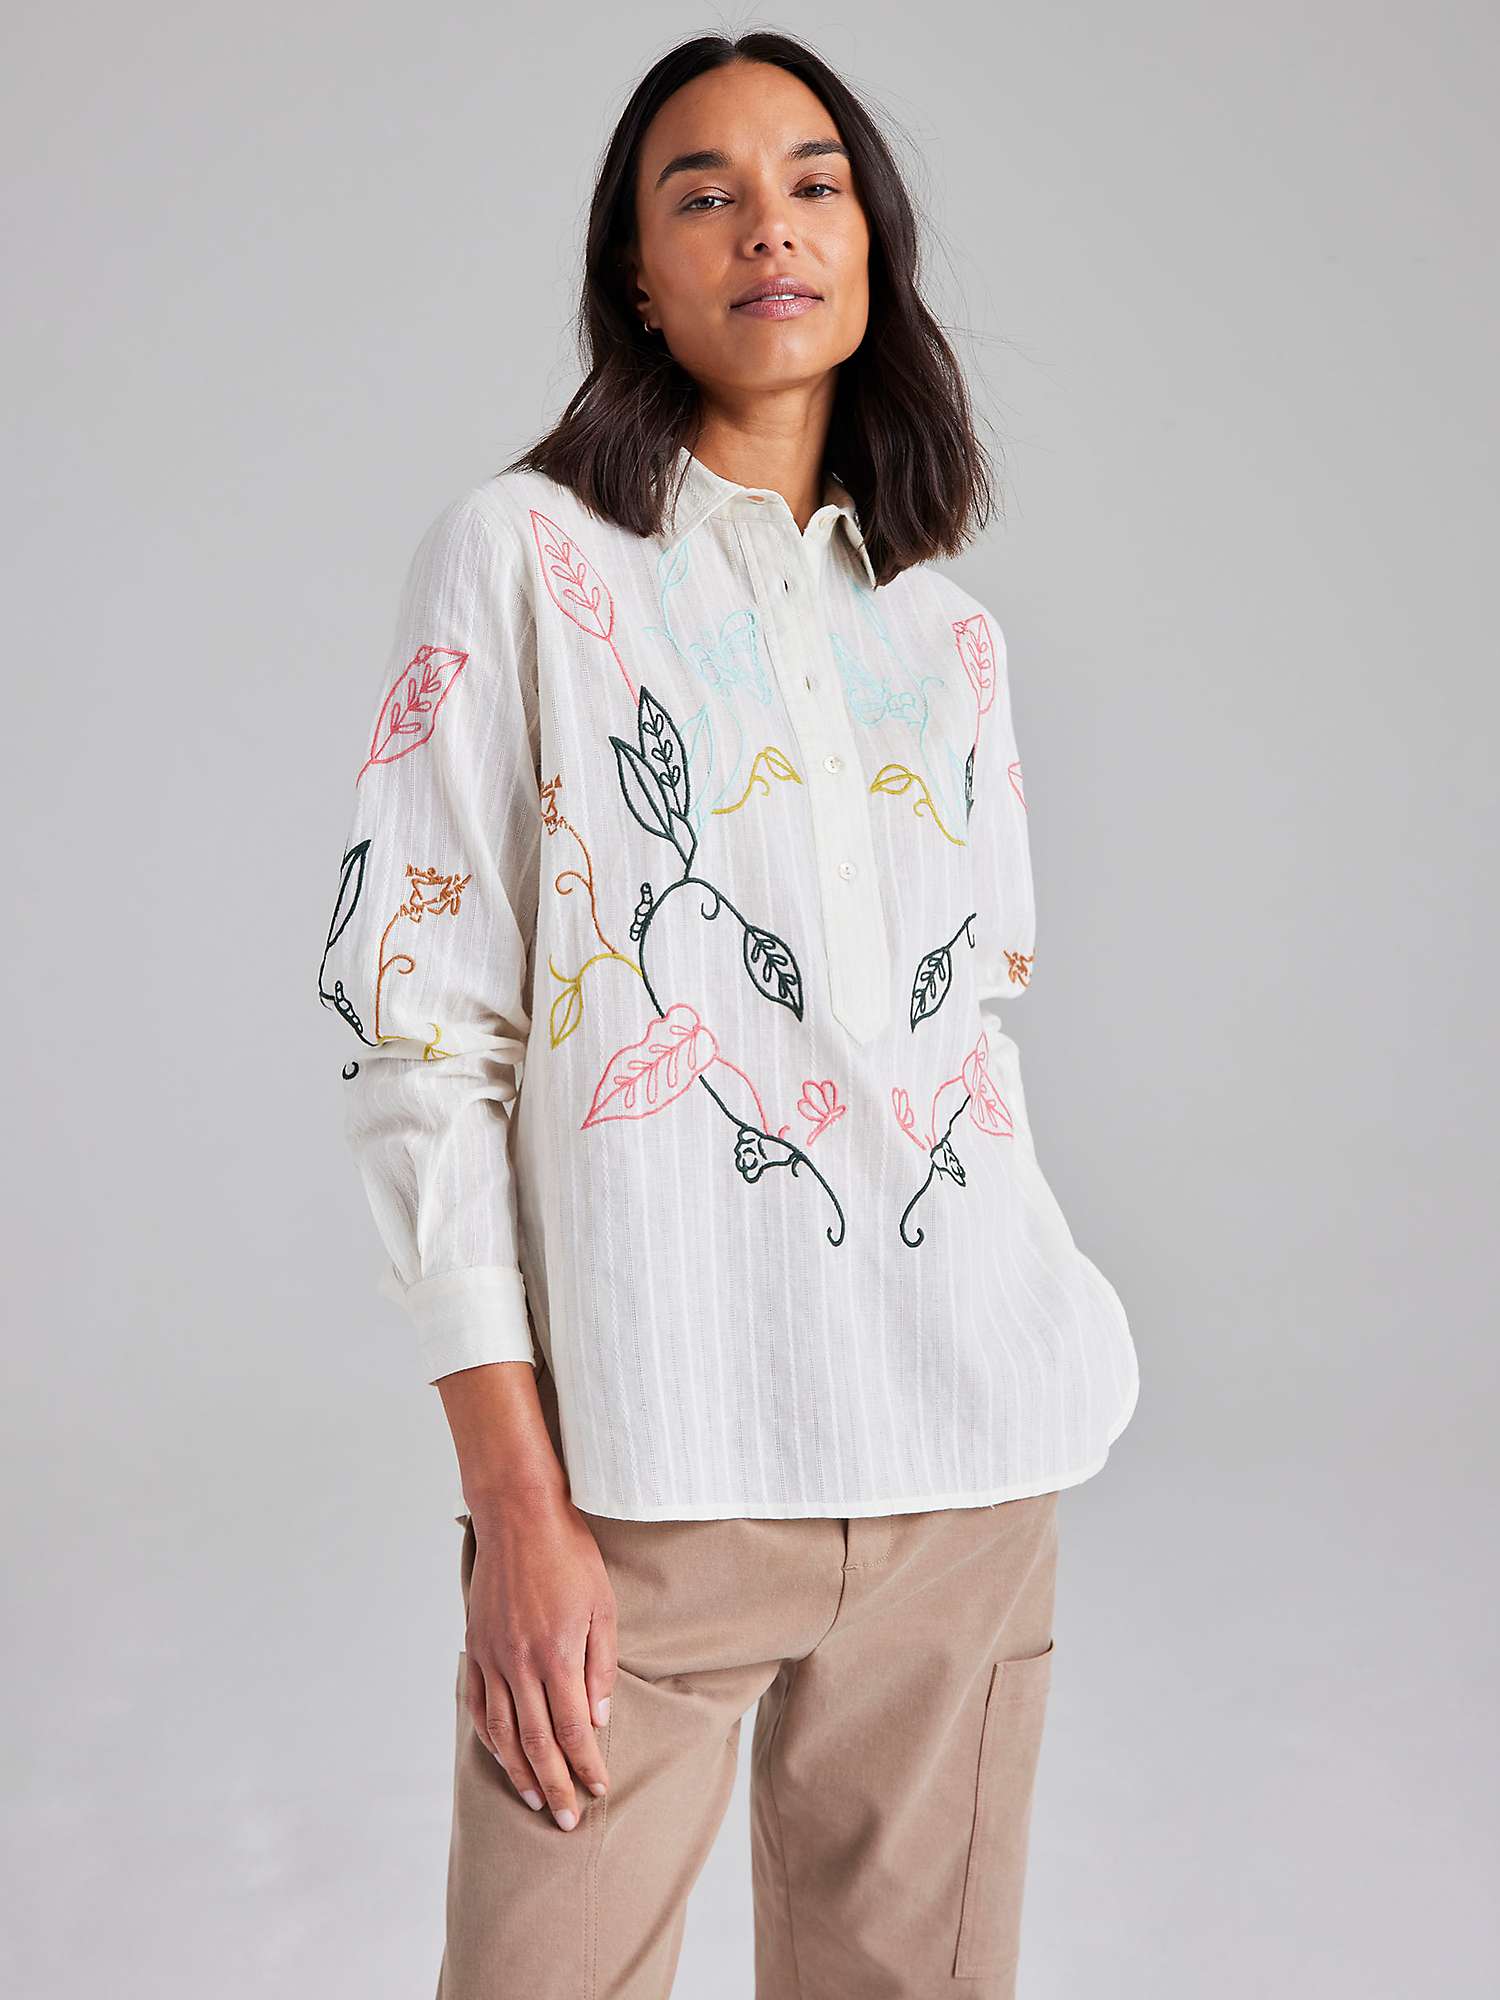 Buy Cape Cove Botanical Embroidered Dobby Stripe Shirt, Dubarry/Chalk Online at johnlewis.com